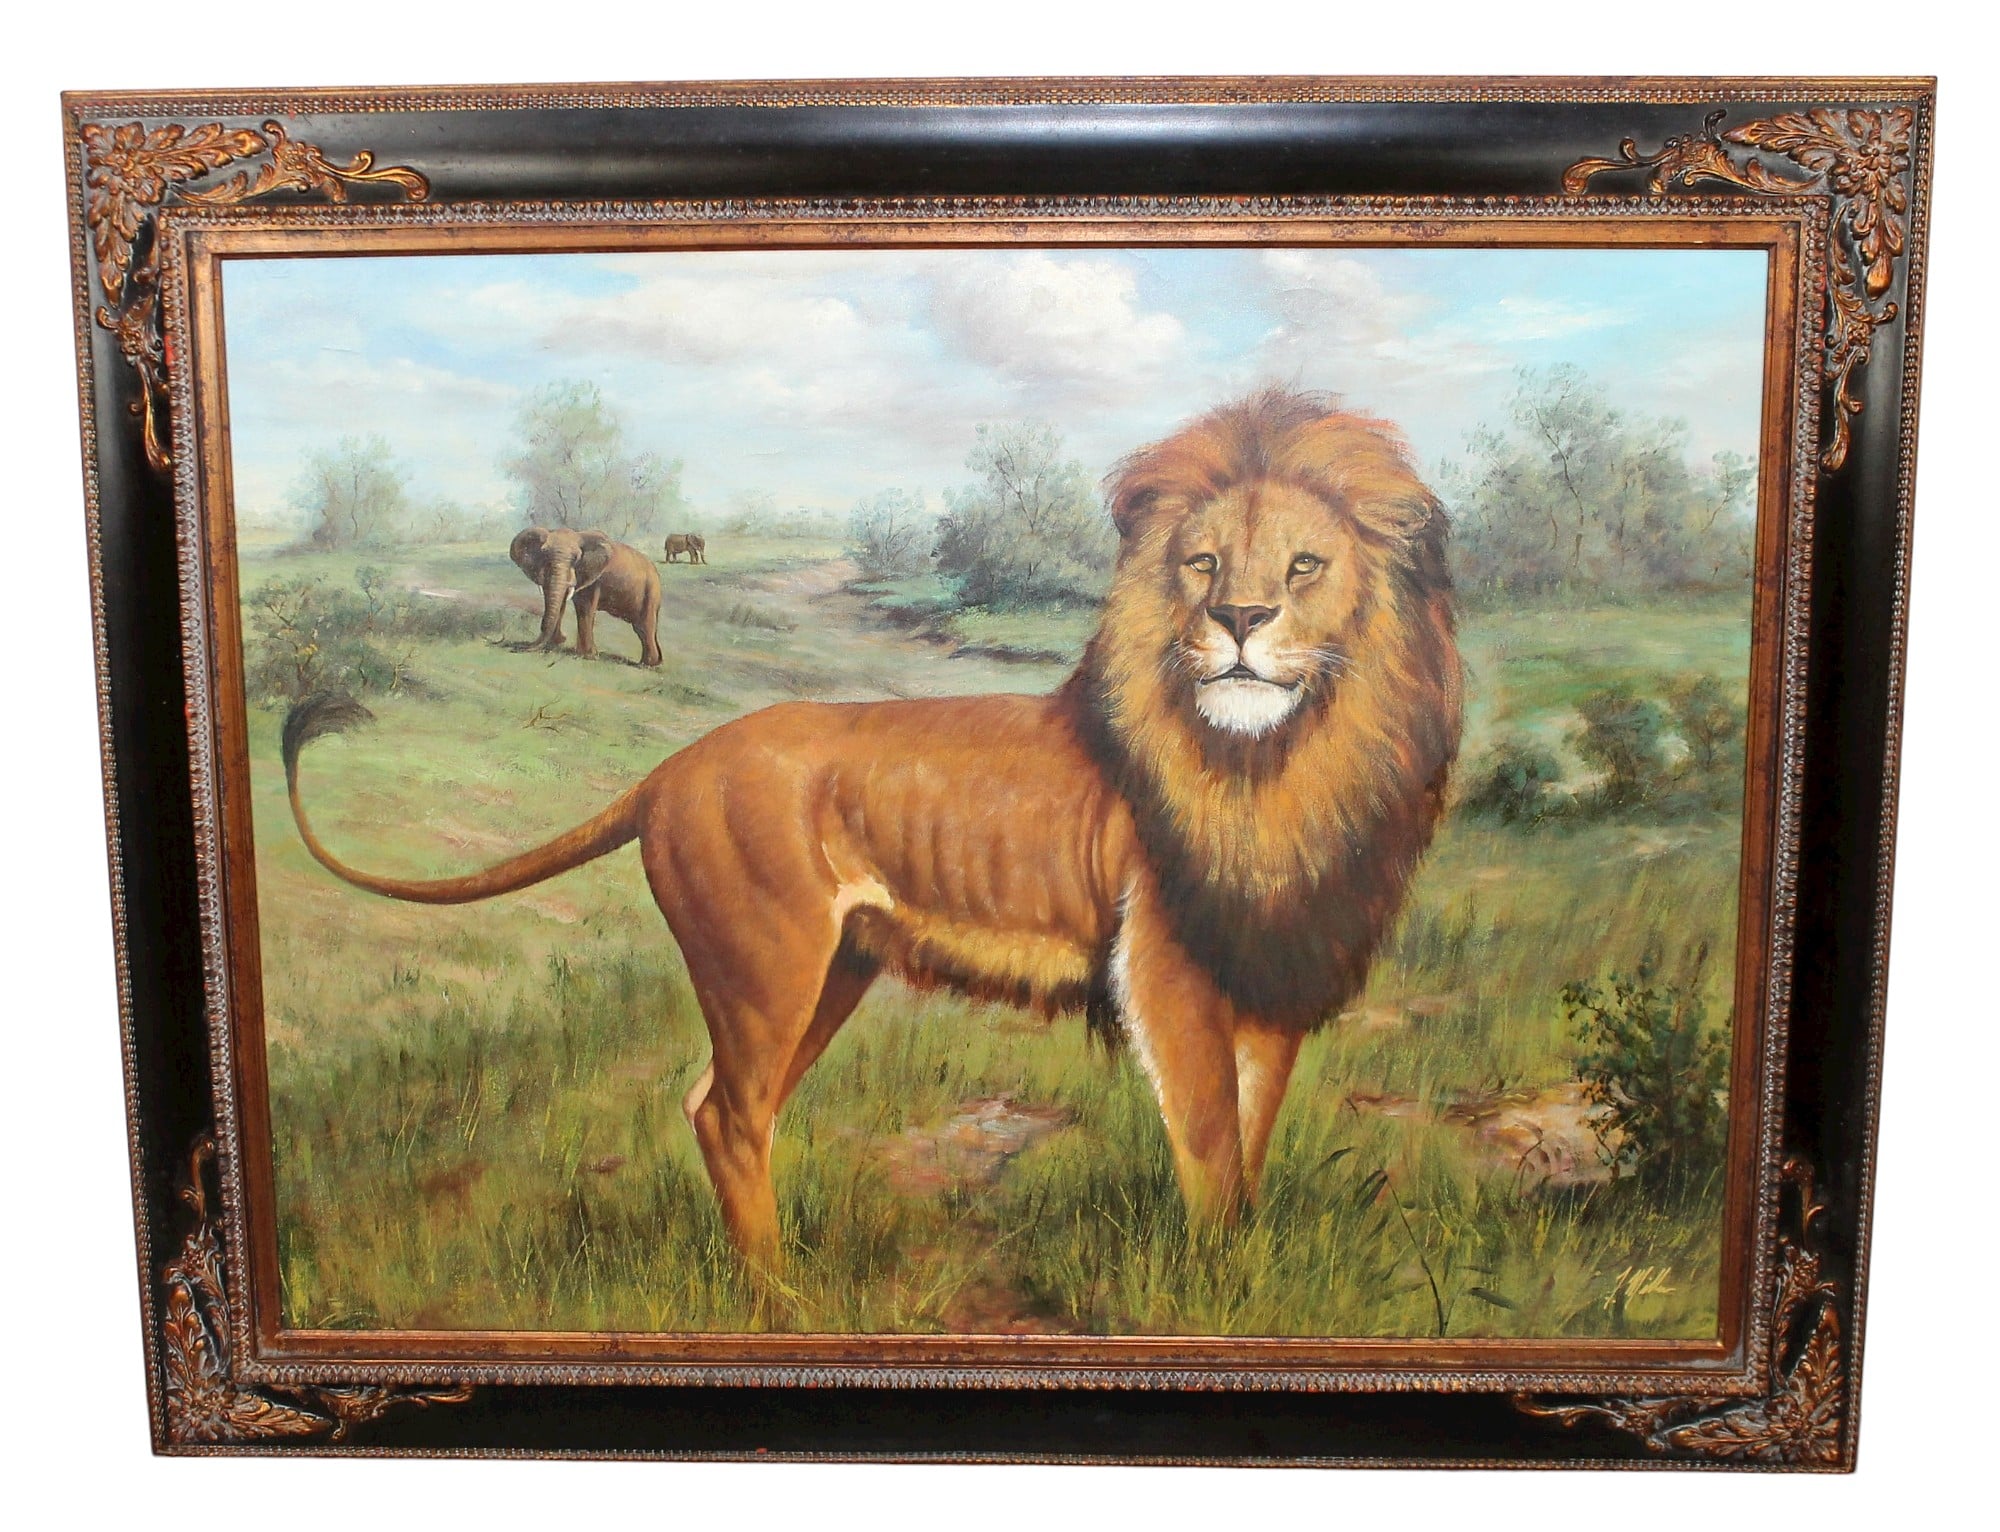 Oil on canvas depicting lion in natural setting